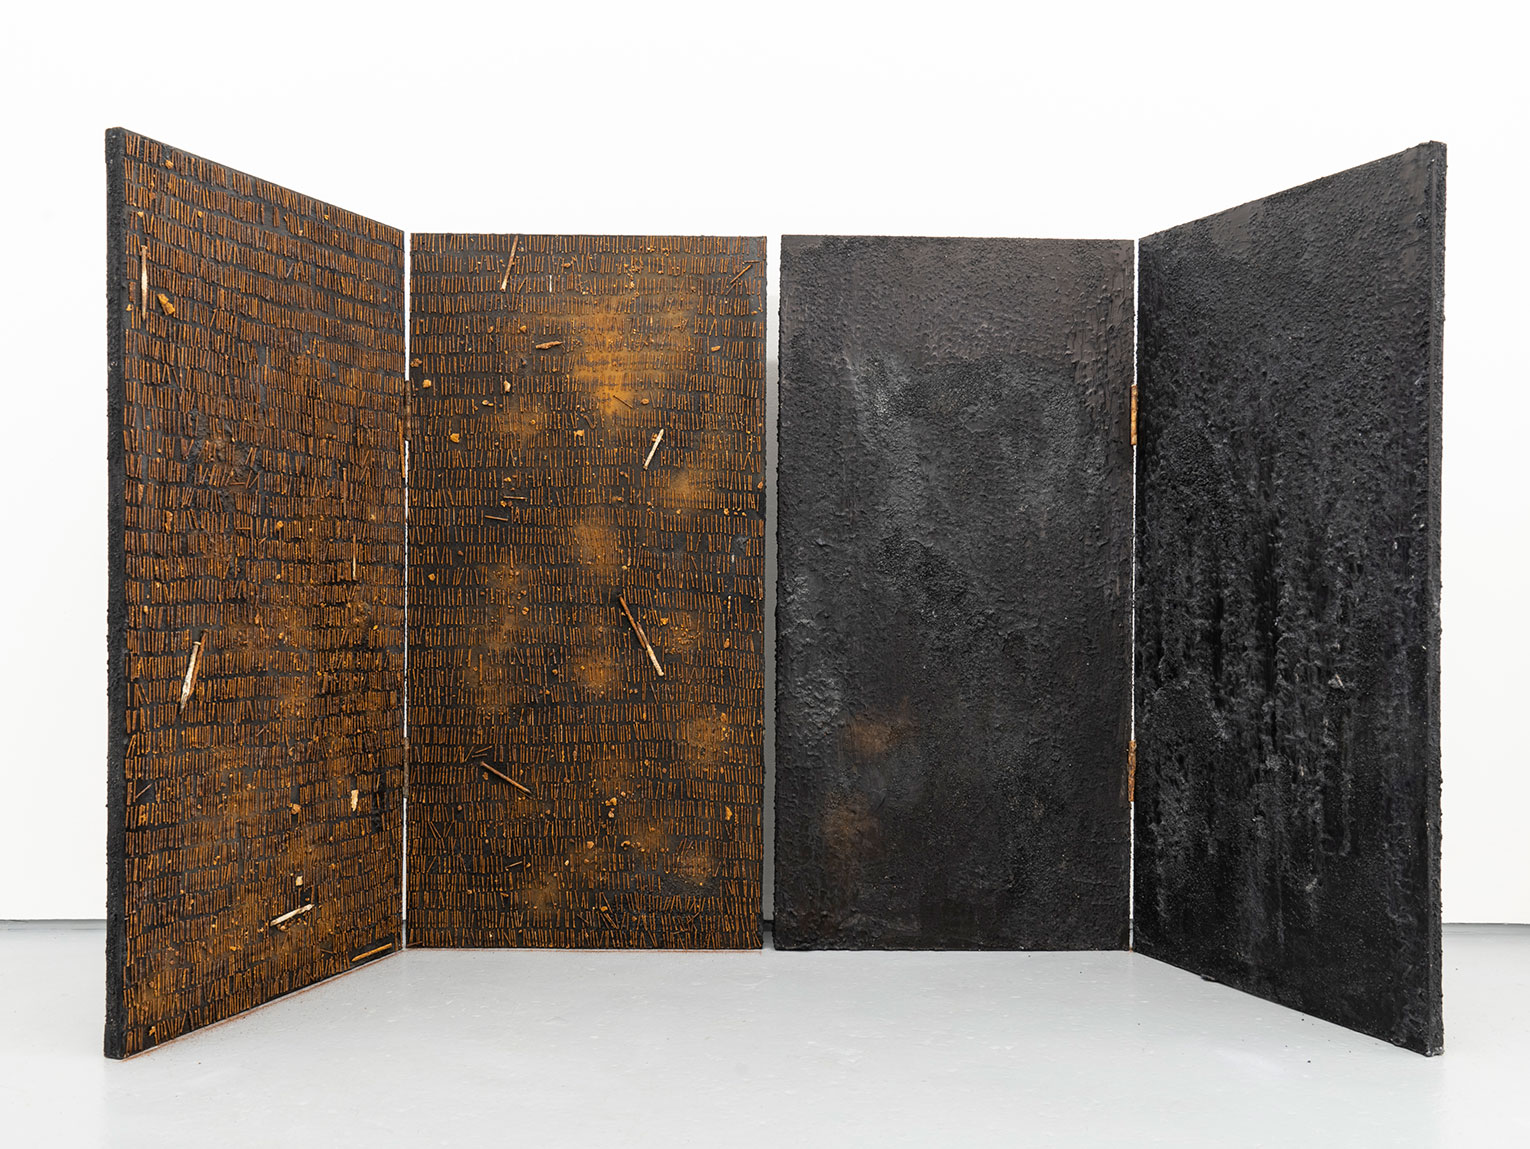 <b>Title: </b>Gate-way<br /><b>Year: </b>2022<br /><b>Medium: </b>Salt,rusted nails, ink, charcoal and glue on wood<br /><b>Size: </b>200 x 120cm (closed)